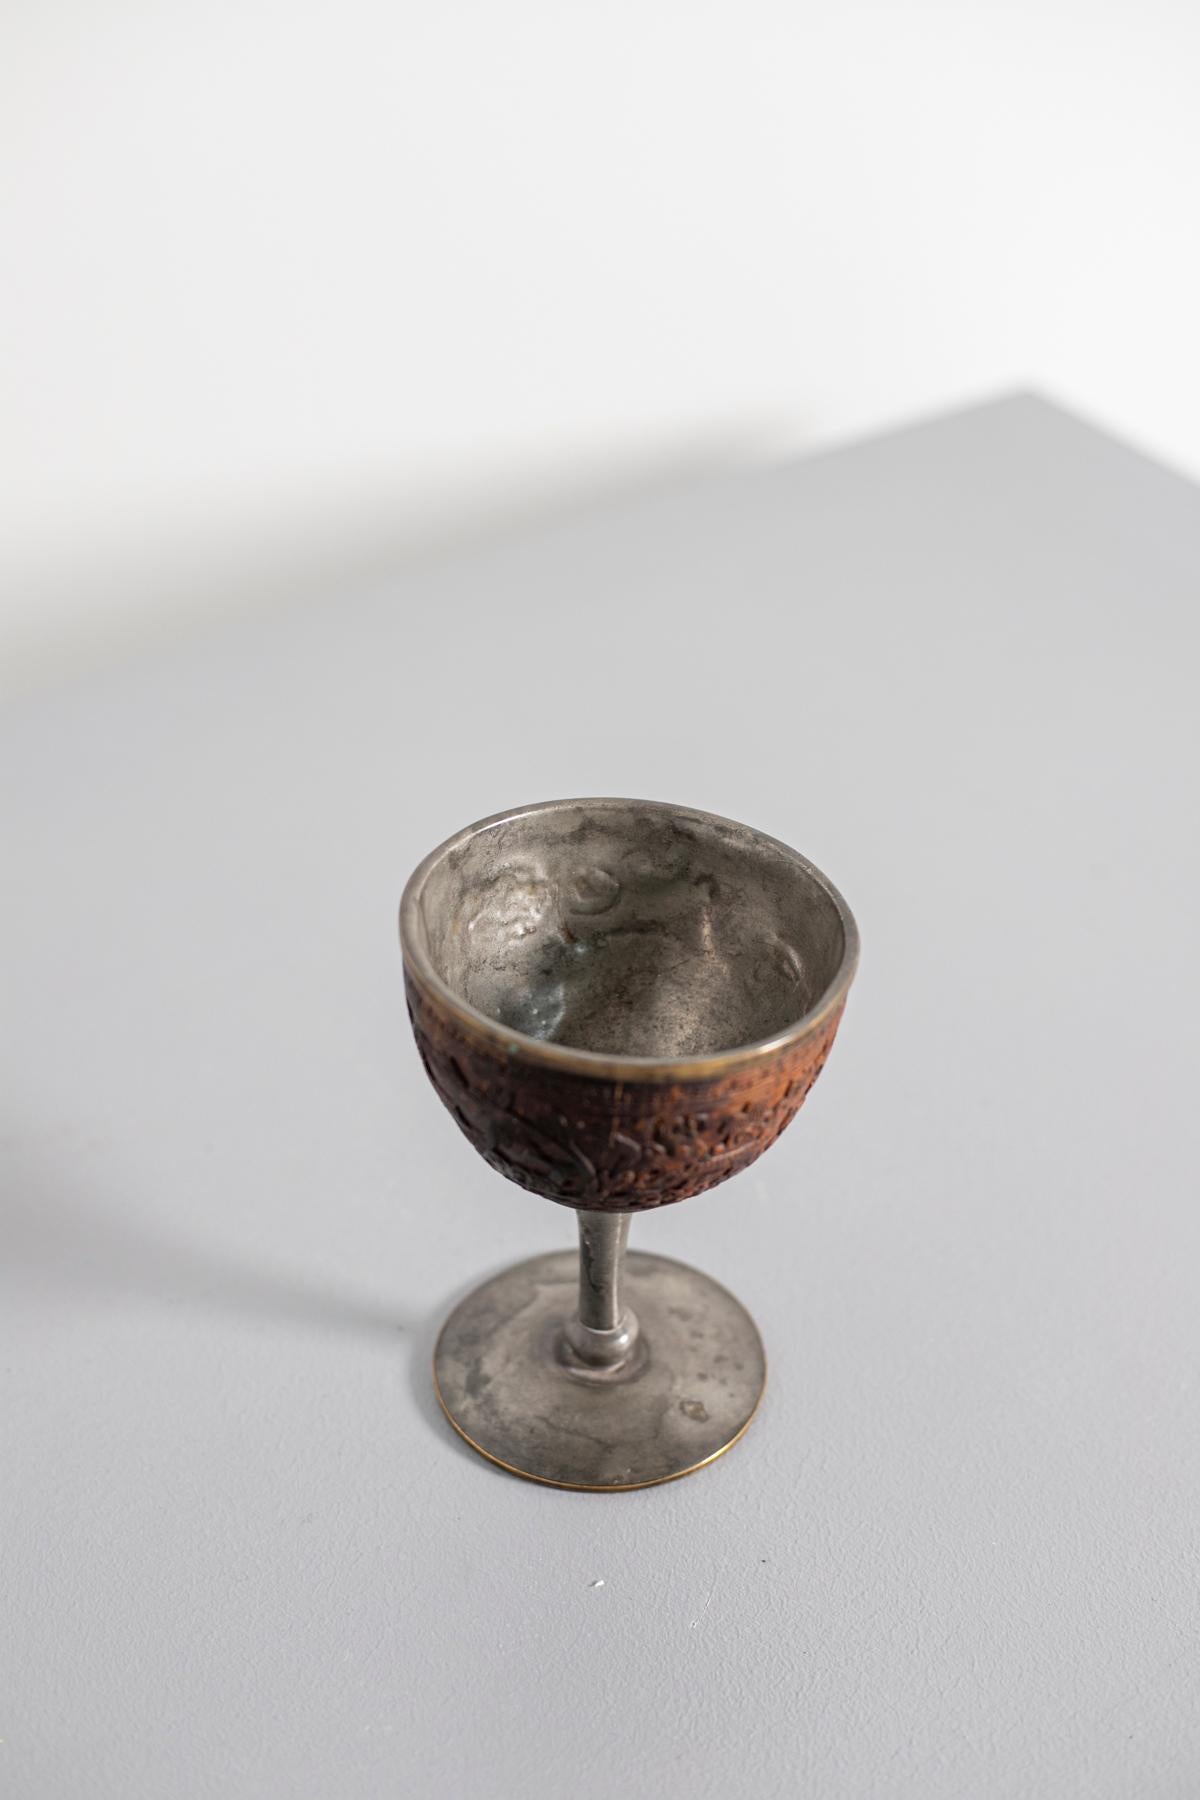 Beautiful antique Chinese chalice from the 1800s.
The Chinese chalice is wrapped externally in a layer of durable coconut fiber, its interior is made of polished pewter. The decorations on this Chinese chalice are very detailed and depict flowers